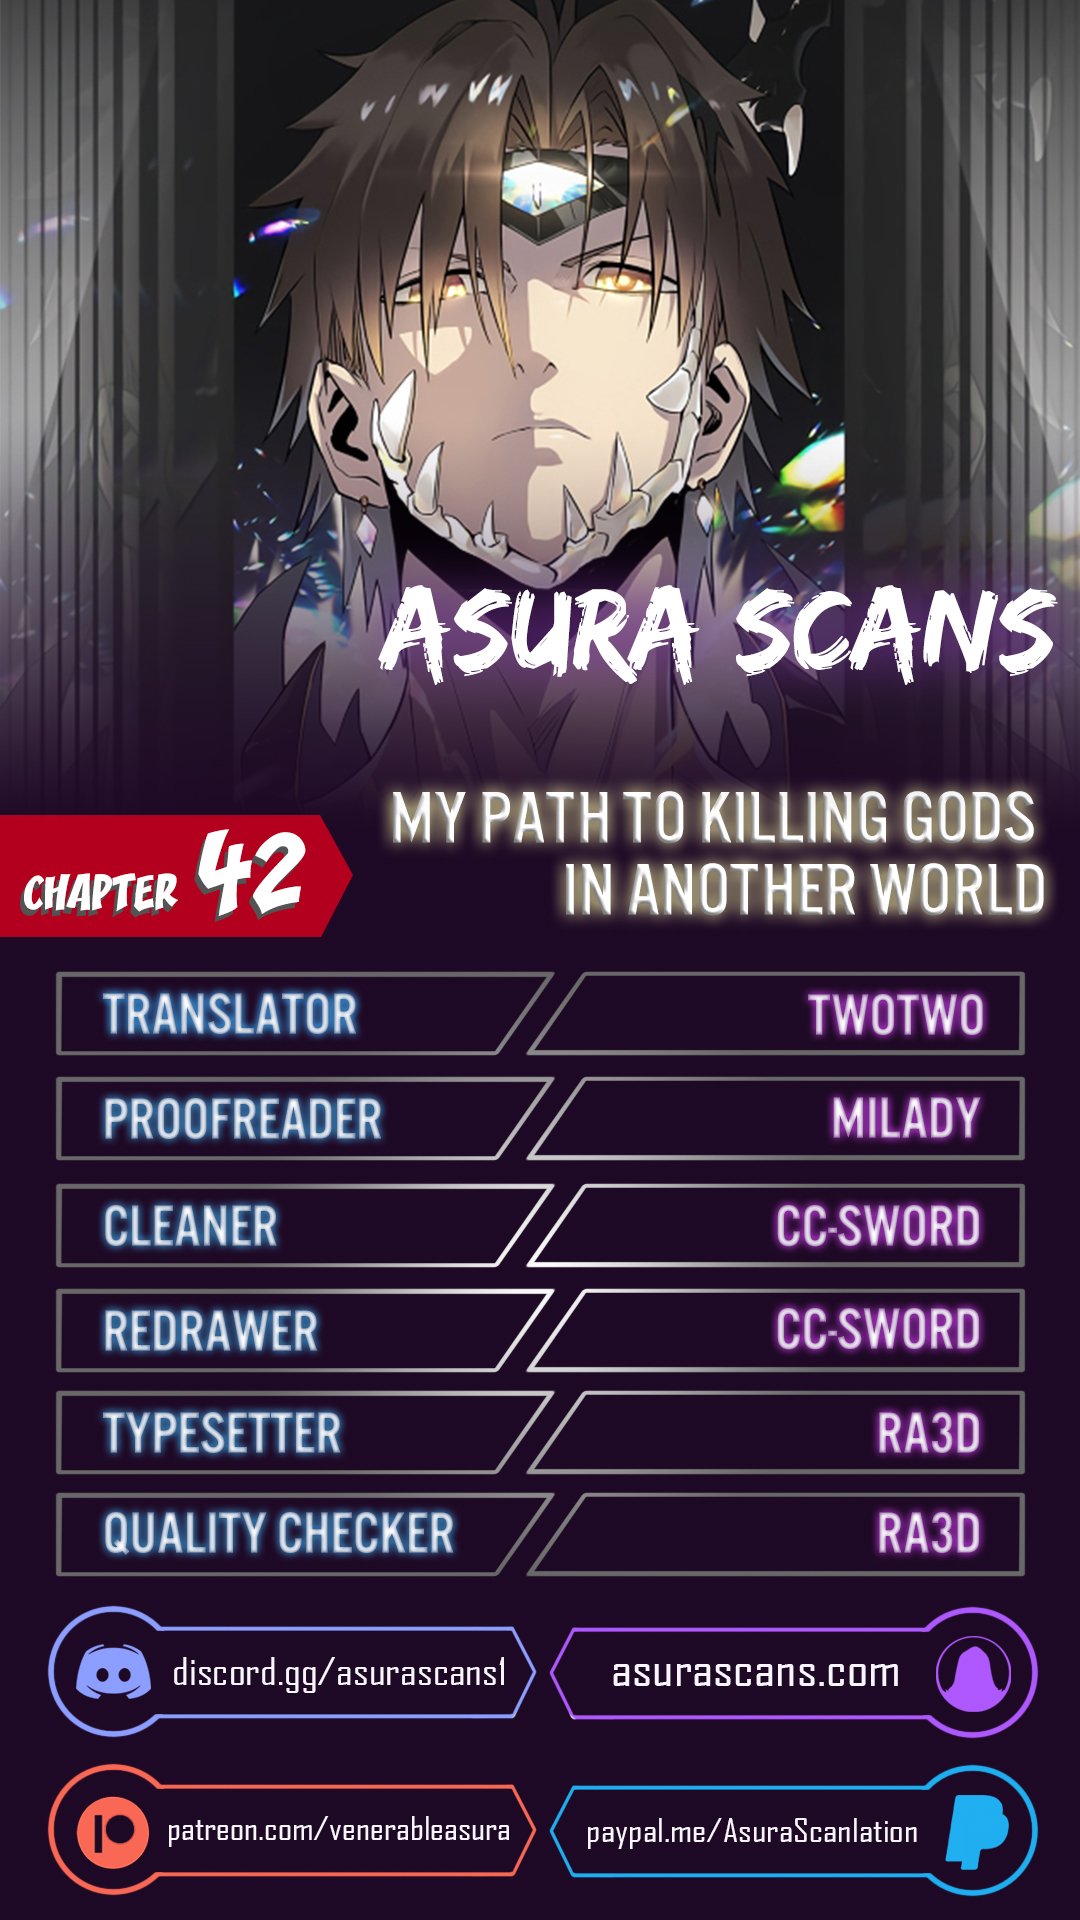 My Path to Killing Gods in Another World - Chapter 23193 - Image 1